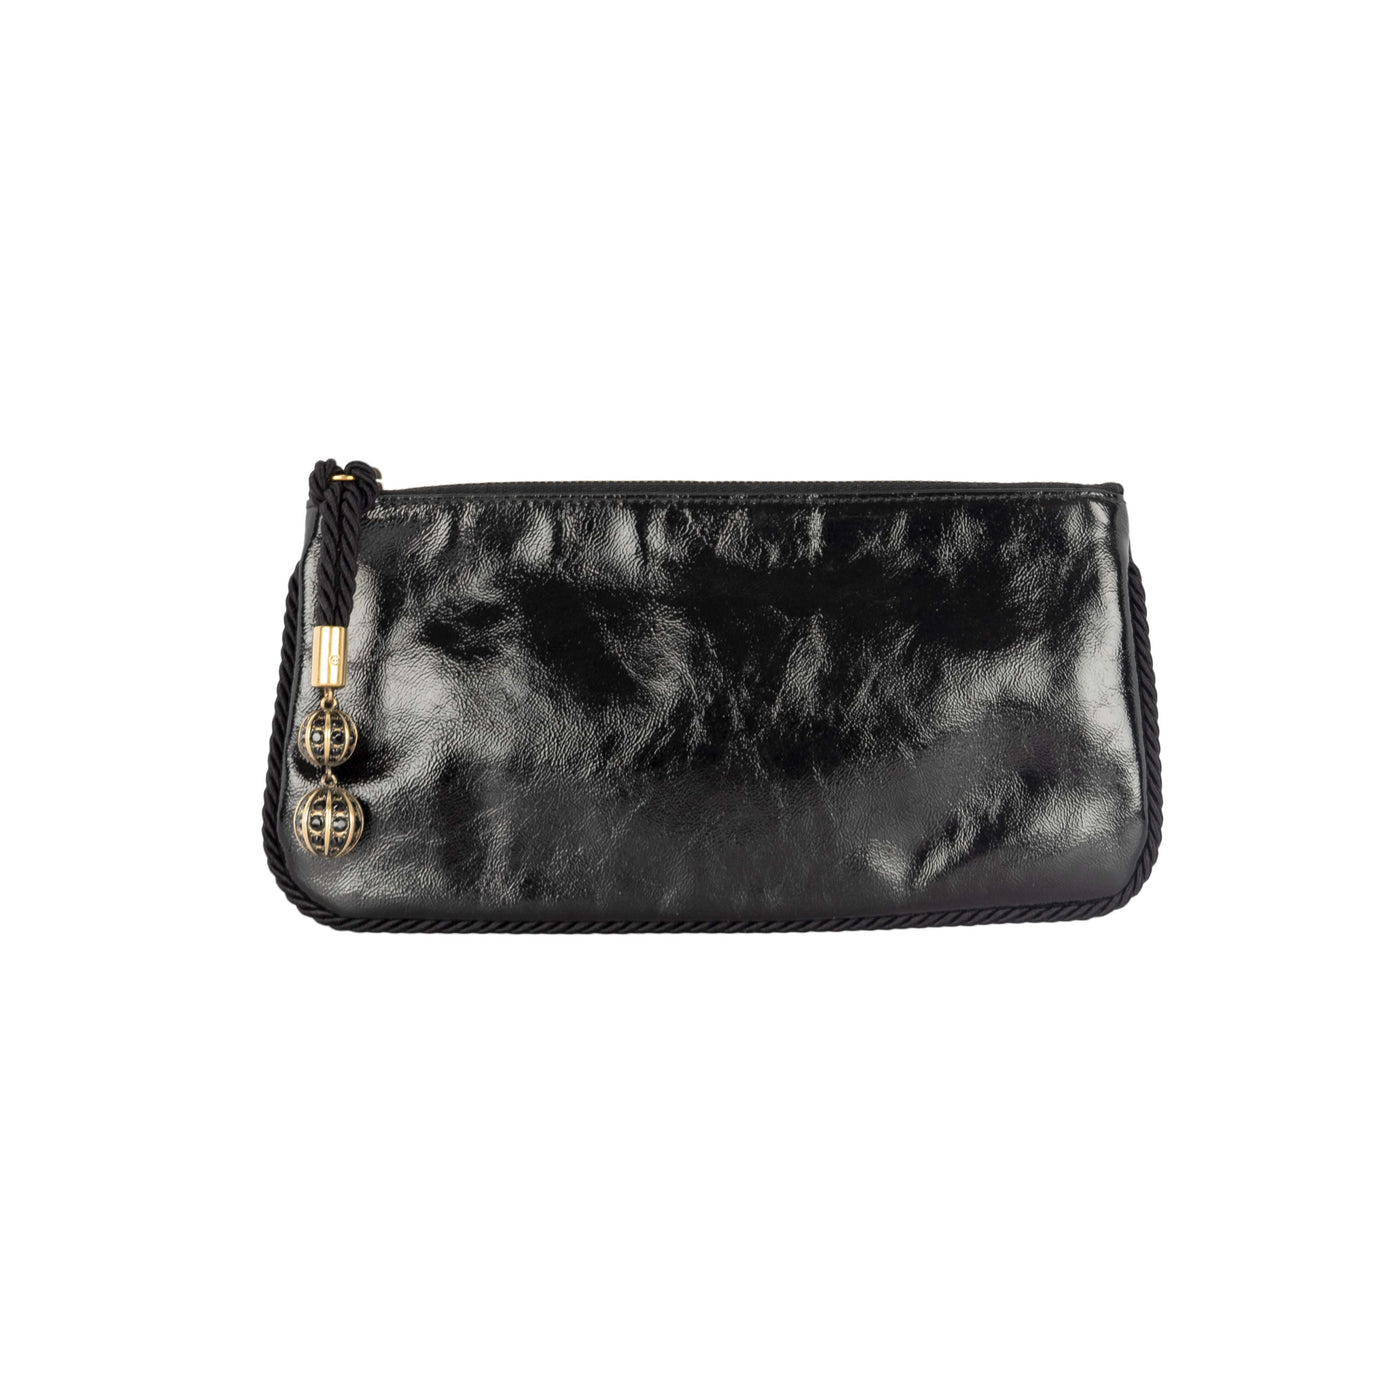 Secondhand Gucci Shiny Leather Clutch with Braided Trim & Tassel